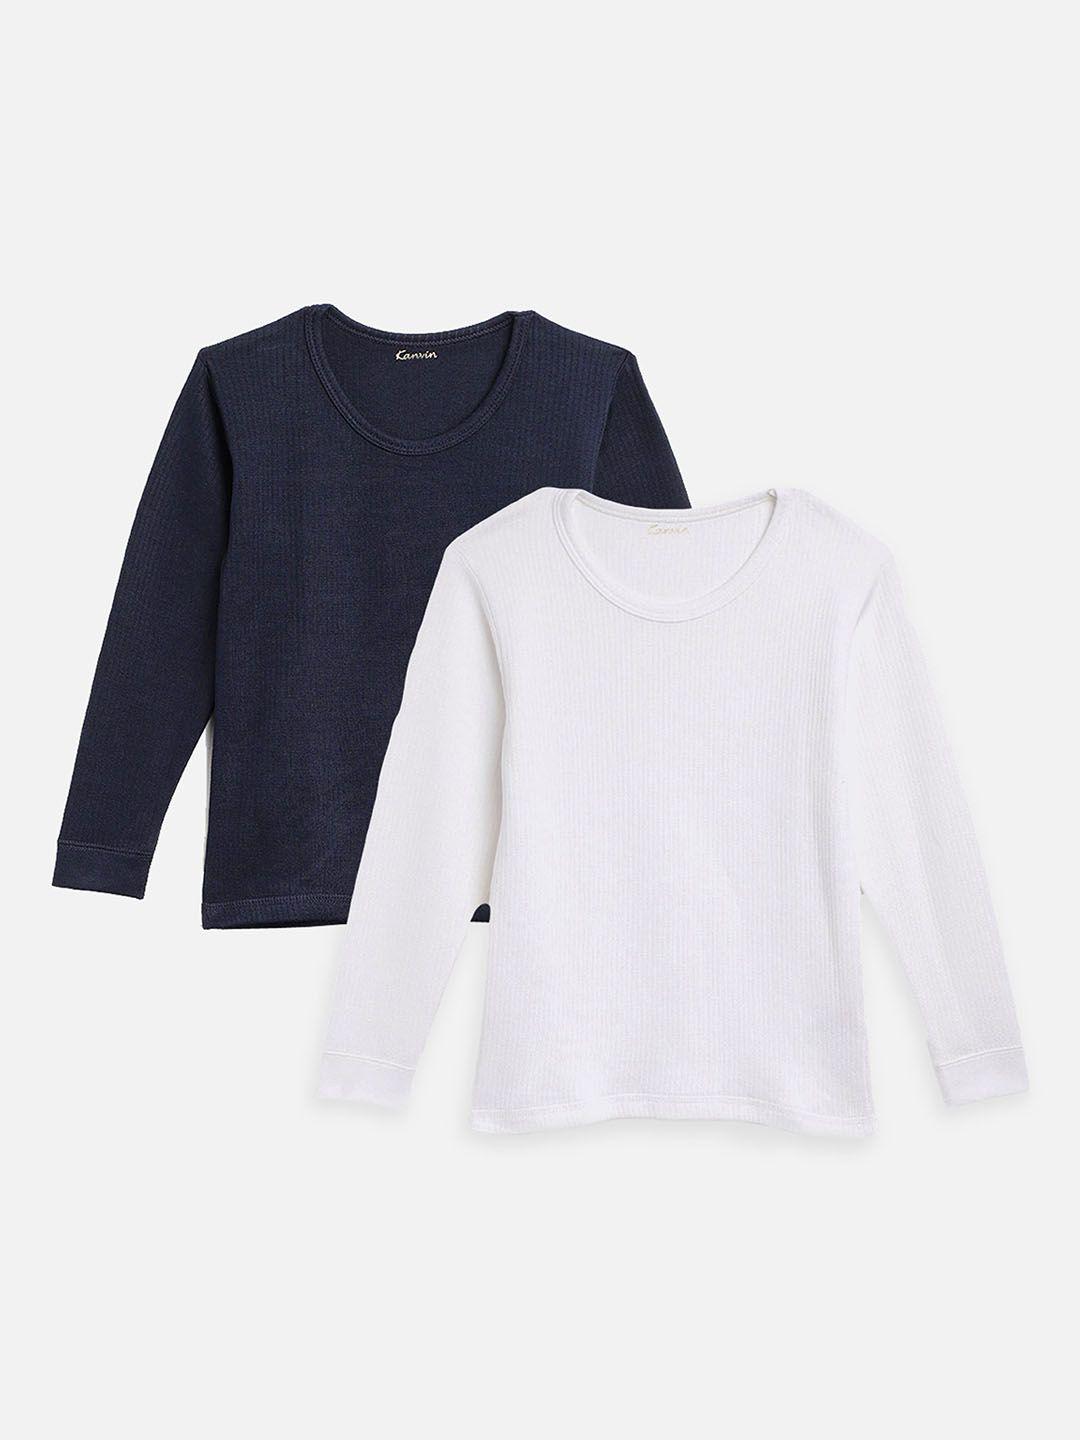 kanvin boys navy blue & white pack of 2 solid thermal tops